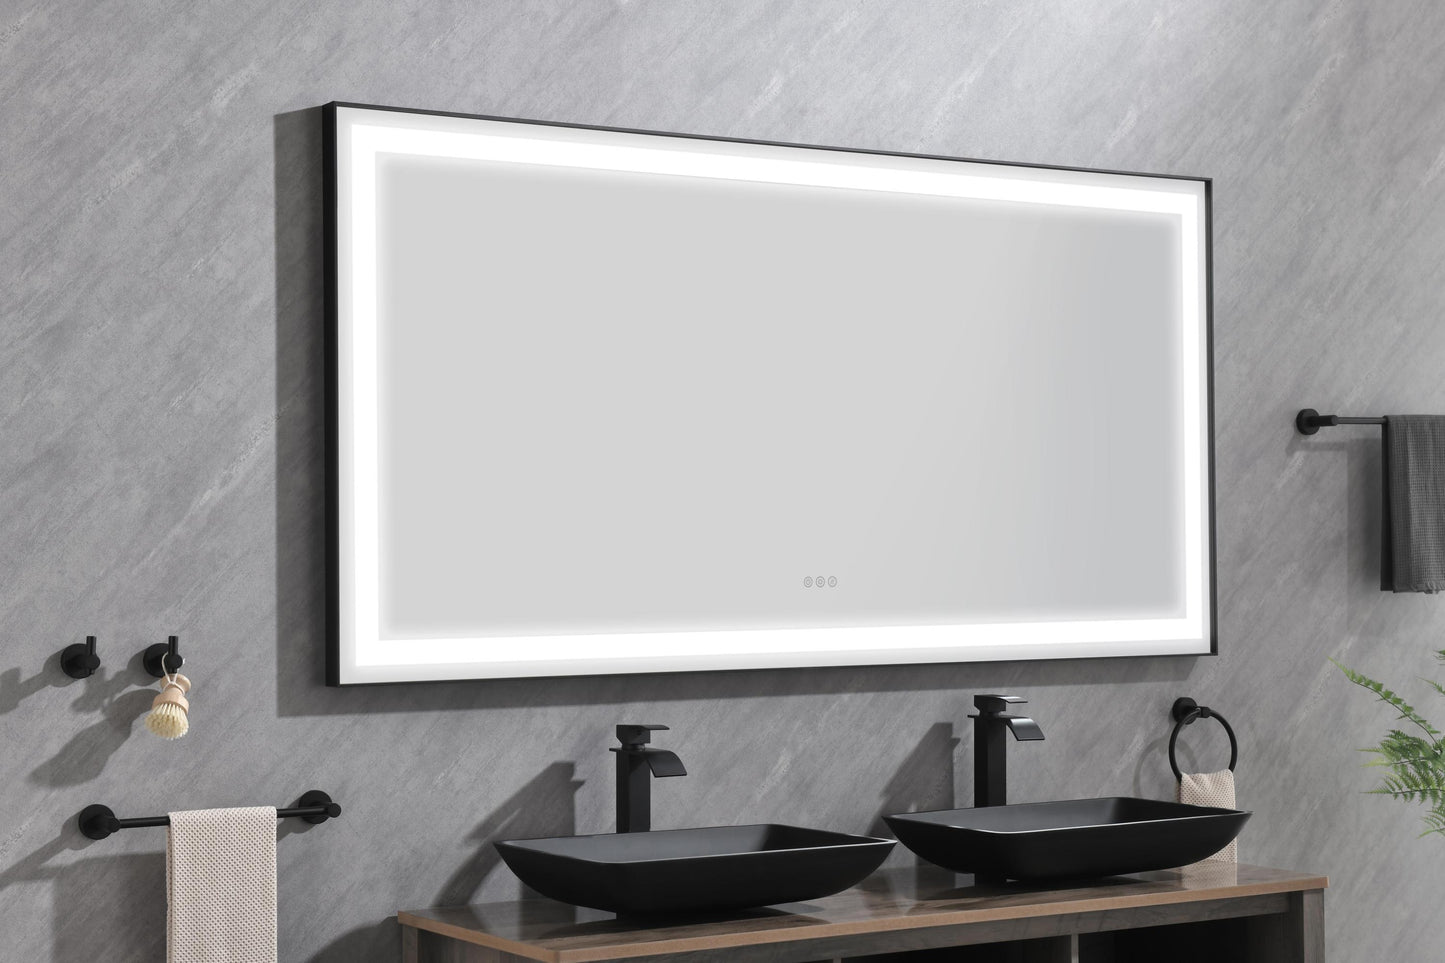 84*36 LED Lighted Bathroom Wall Mounted Mirror with High Lumen+Anti-Fog Separately Control

bedroom full-length mirror  bathroom led mirror  hair salon mirror